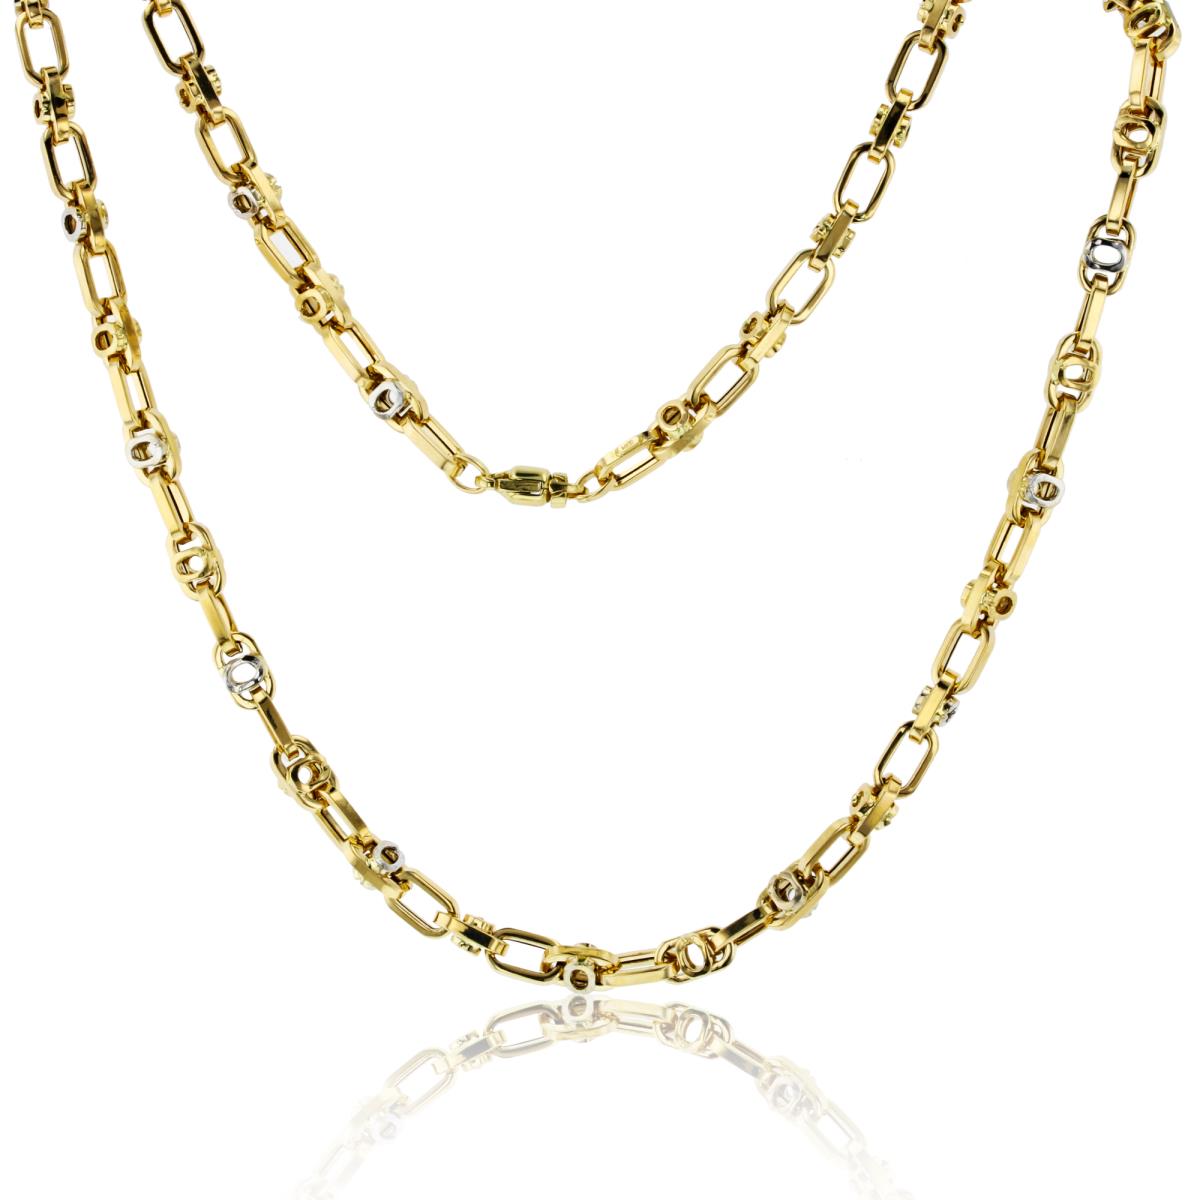 14K Yellow Gold Polished Squared Multi Links 24" Chain